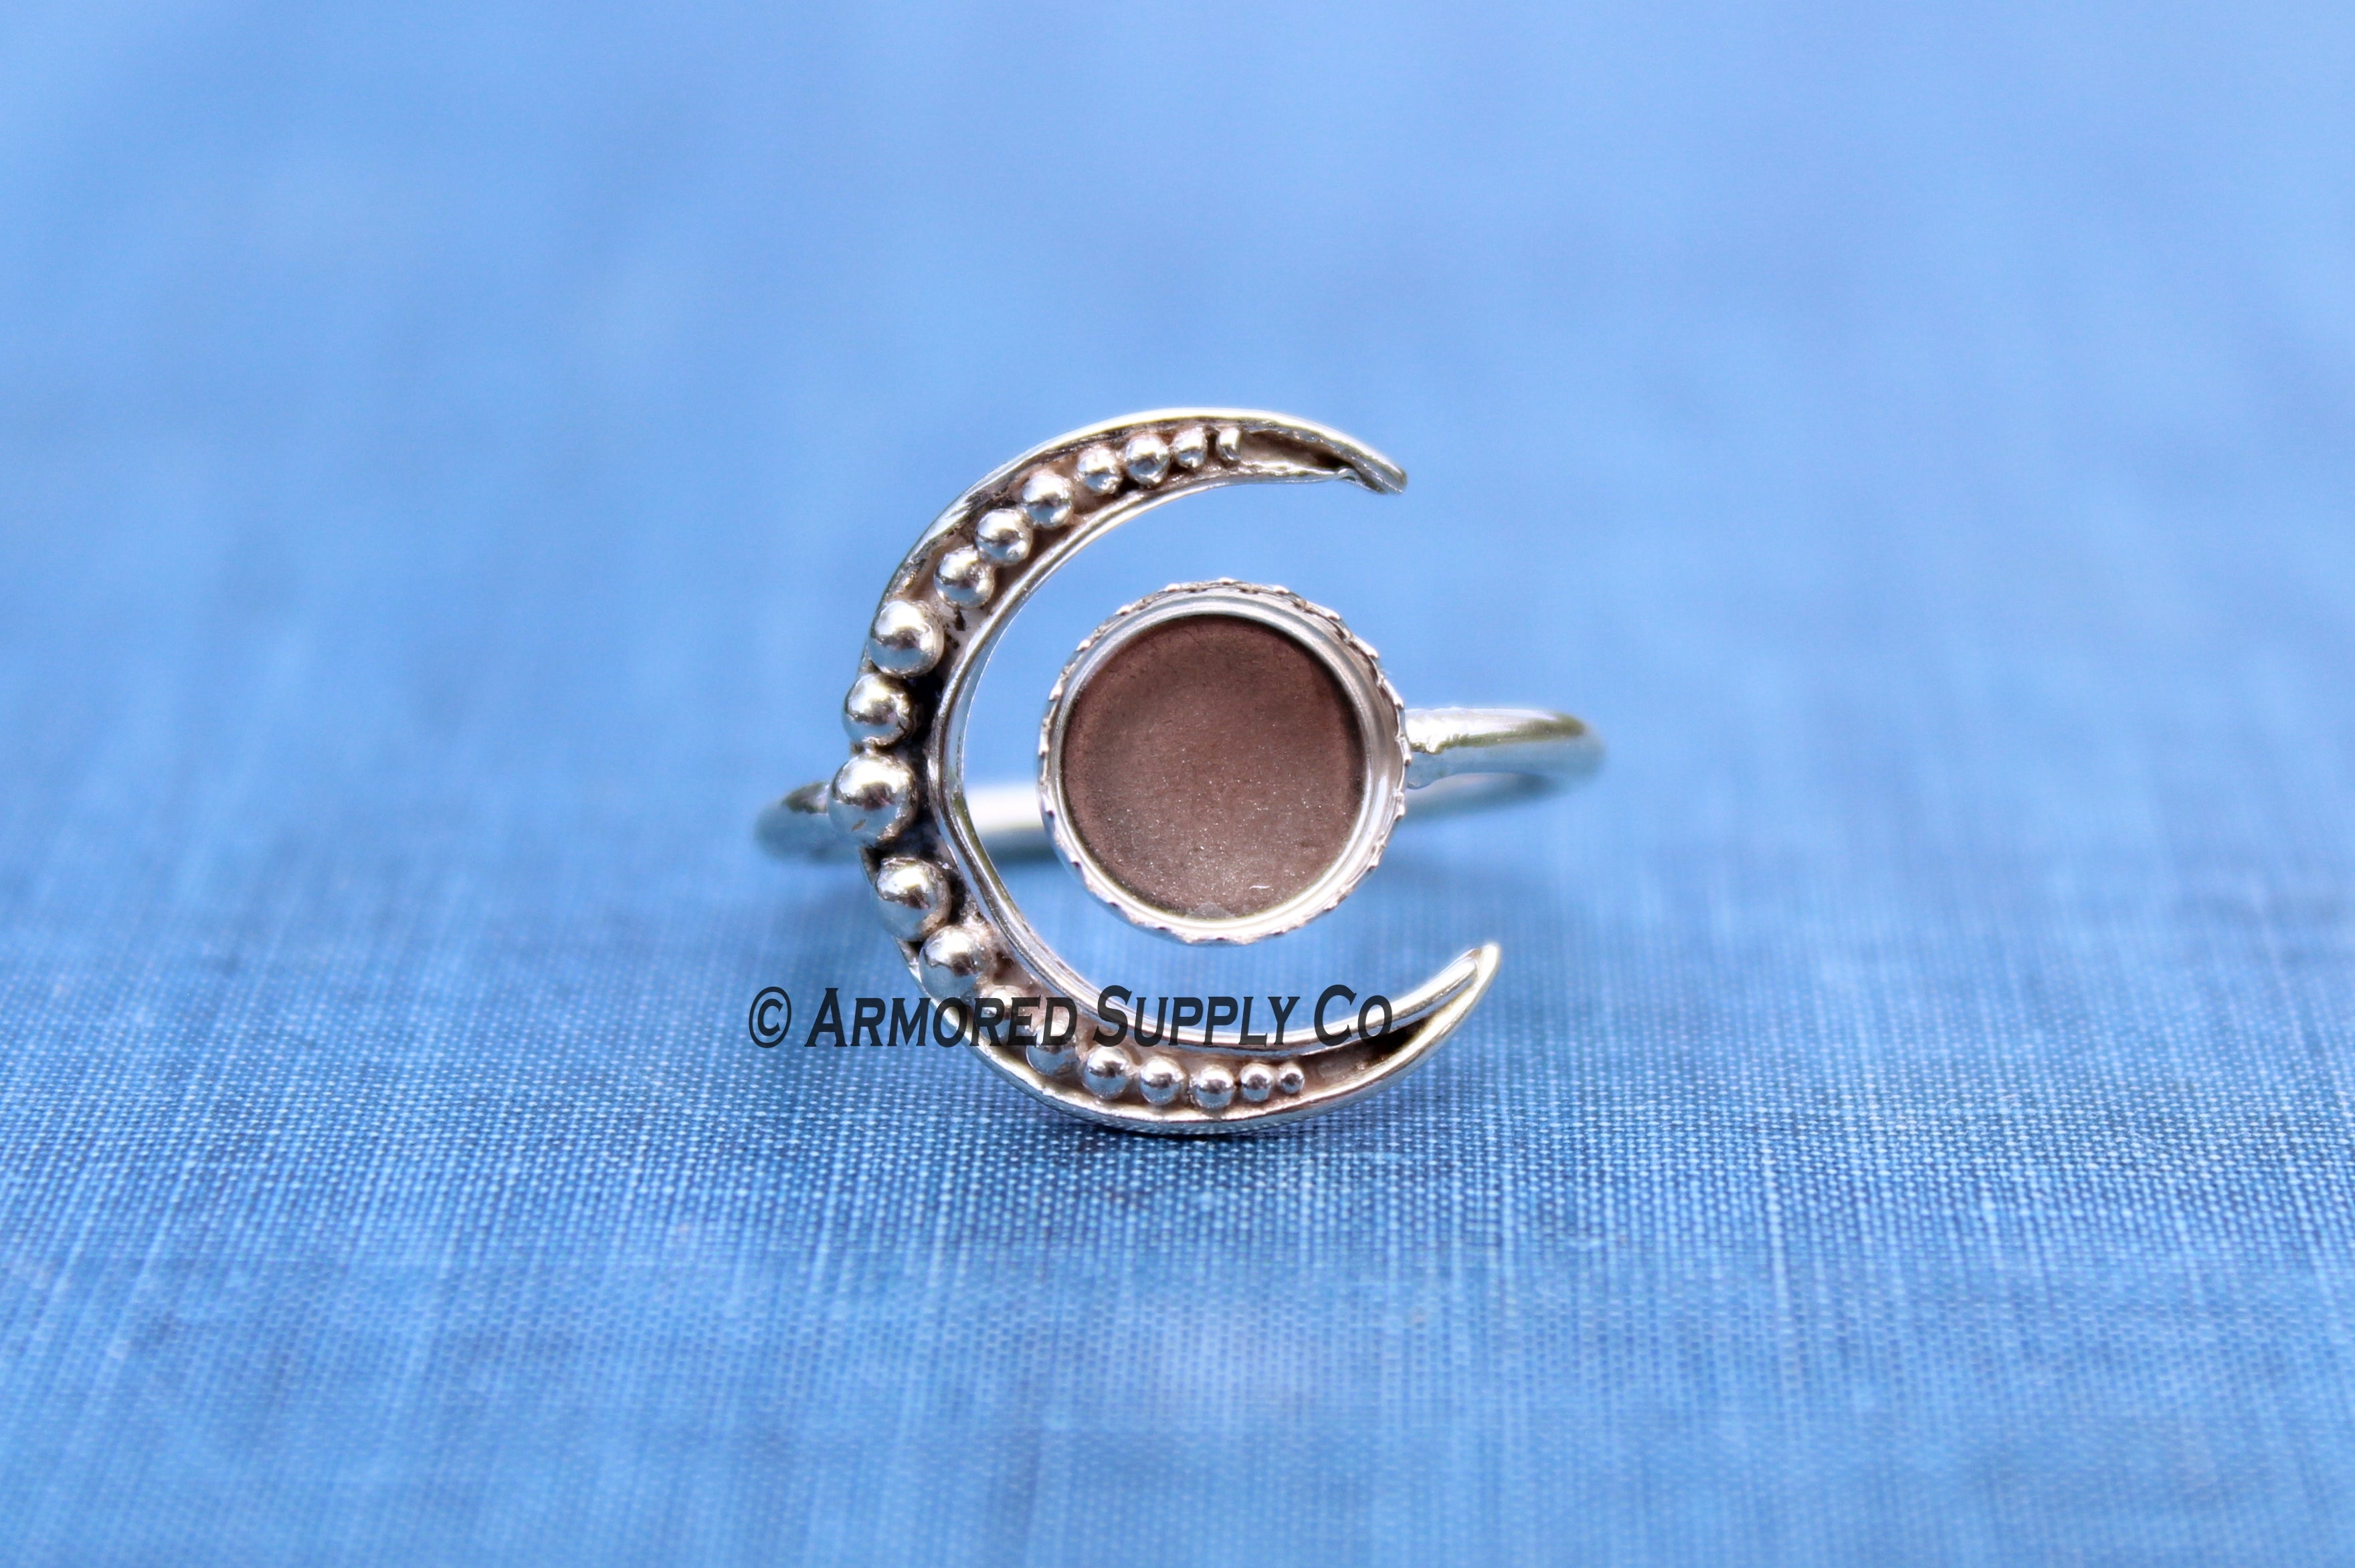 Silver Beaded Crescent Moon Bezel Cup Ring blank